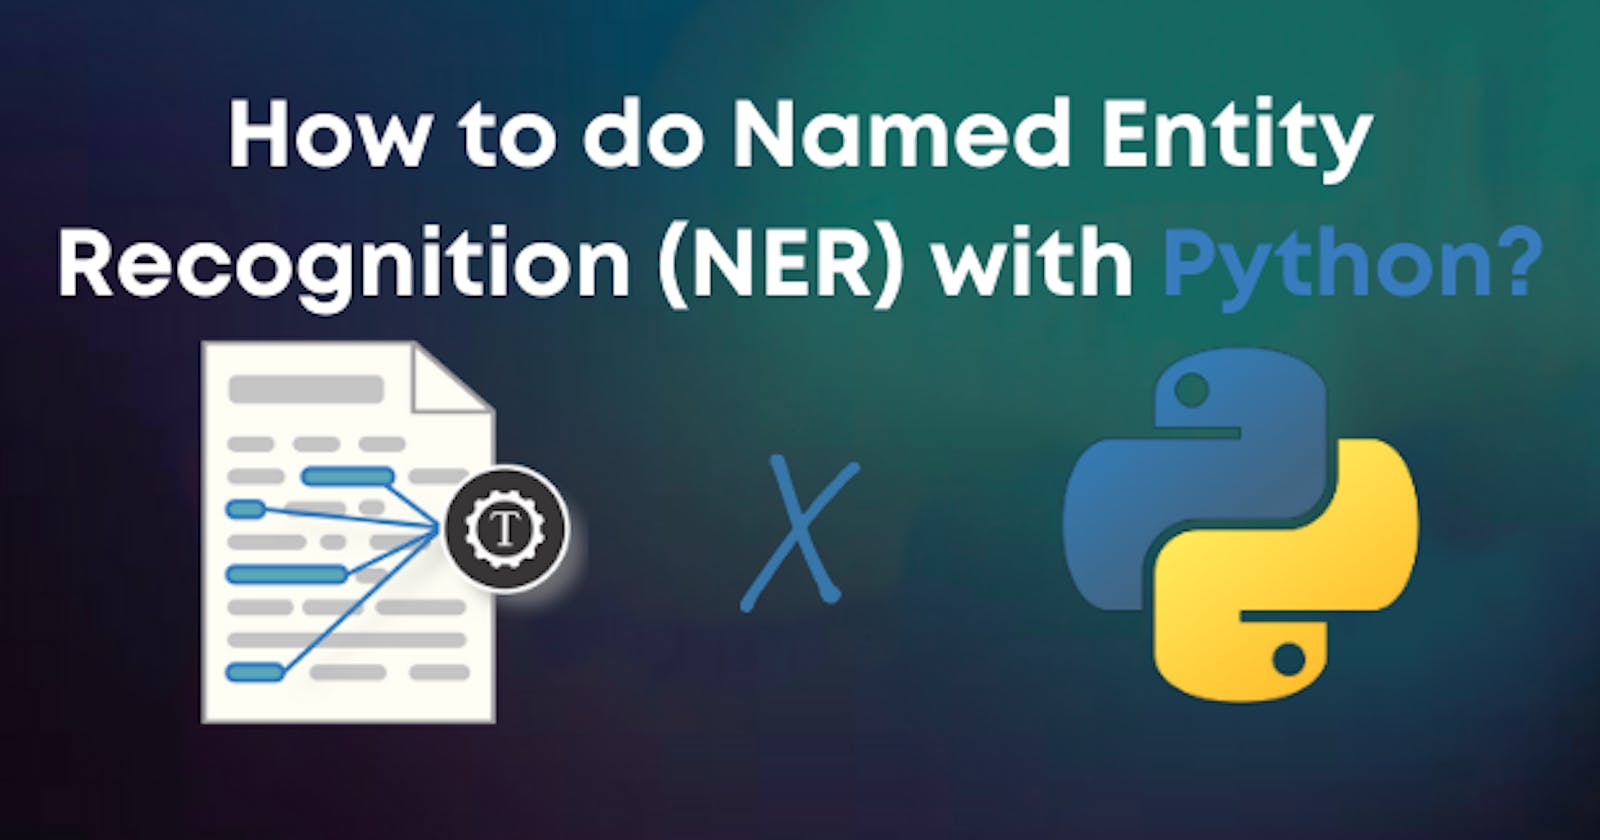 How to do Named Entity Recognition (NER) with Python?